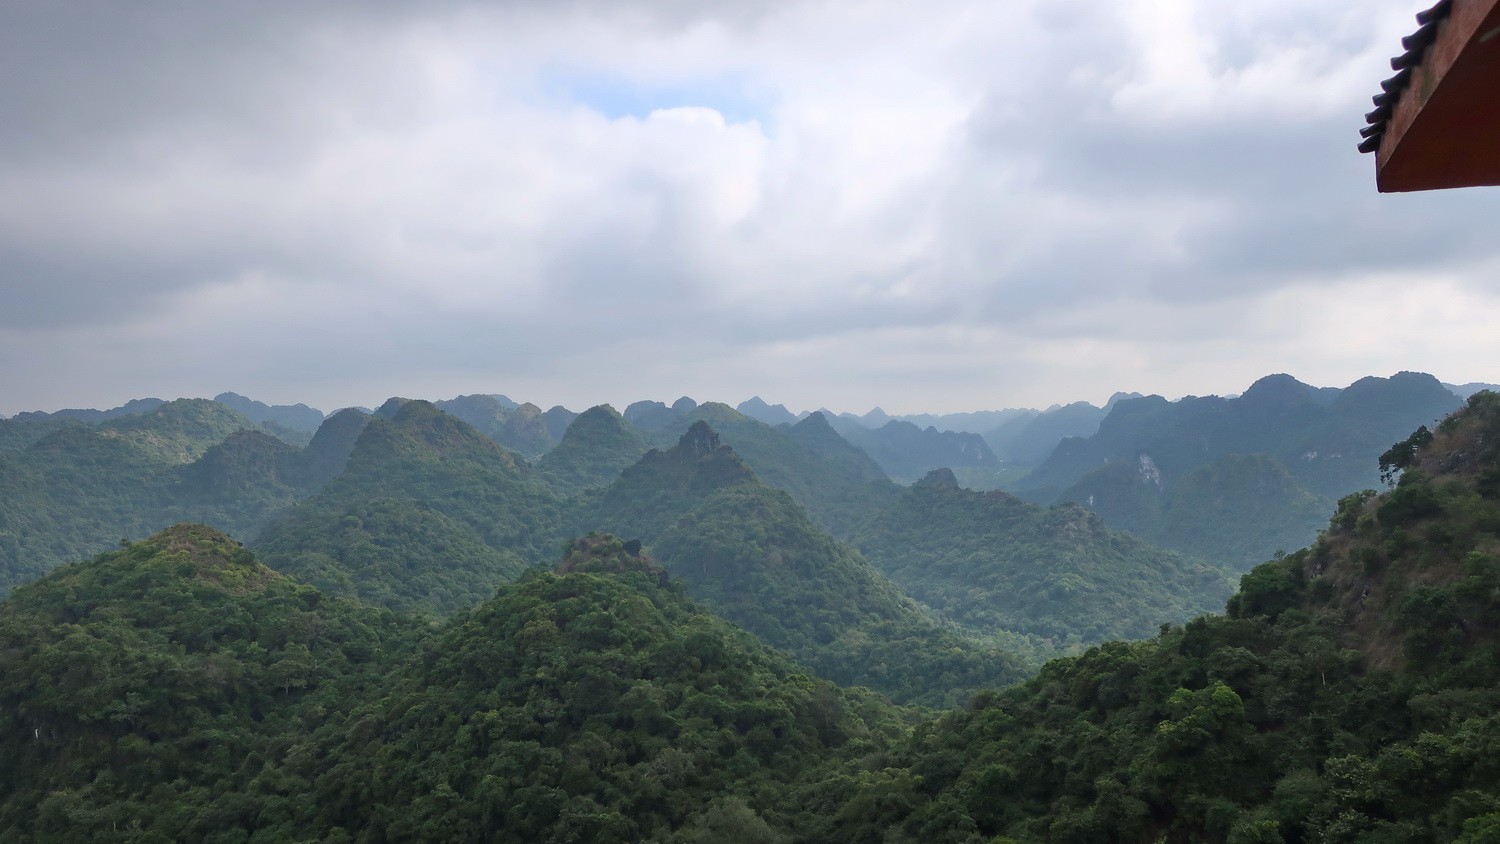 View from 225 meters high Dinh Ngu Lam in the Cat Ba National Park